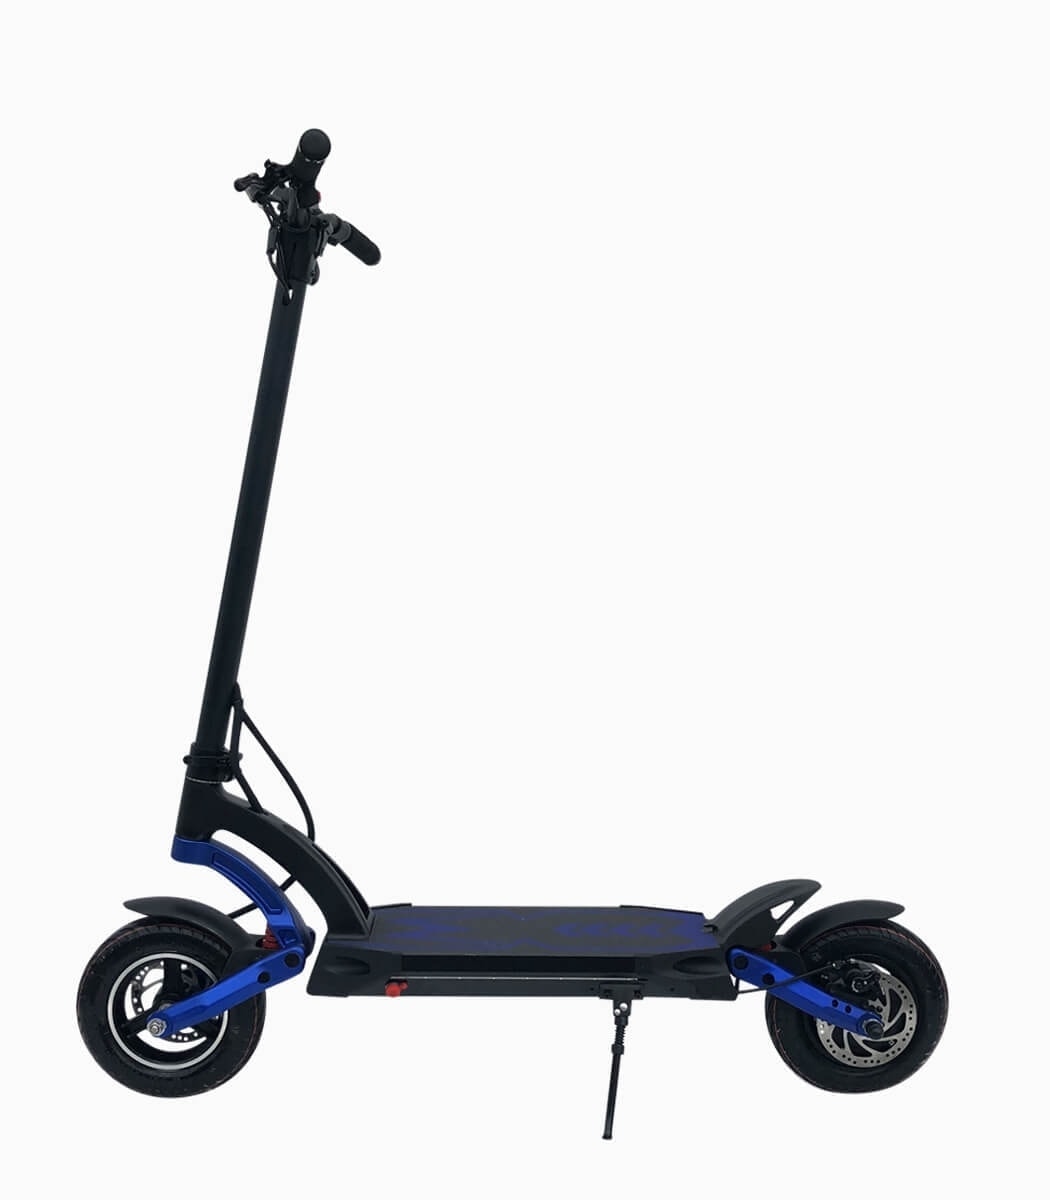 MOBOT MANTIS (BLUE10AH) UL2272 certified high performance electric scooter left